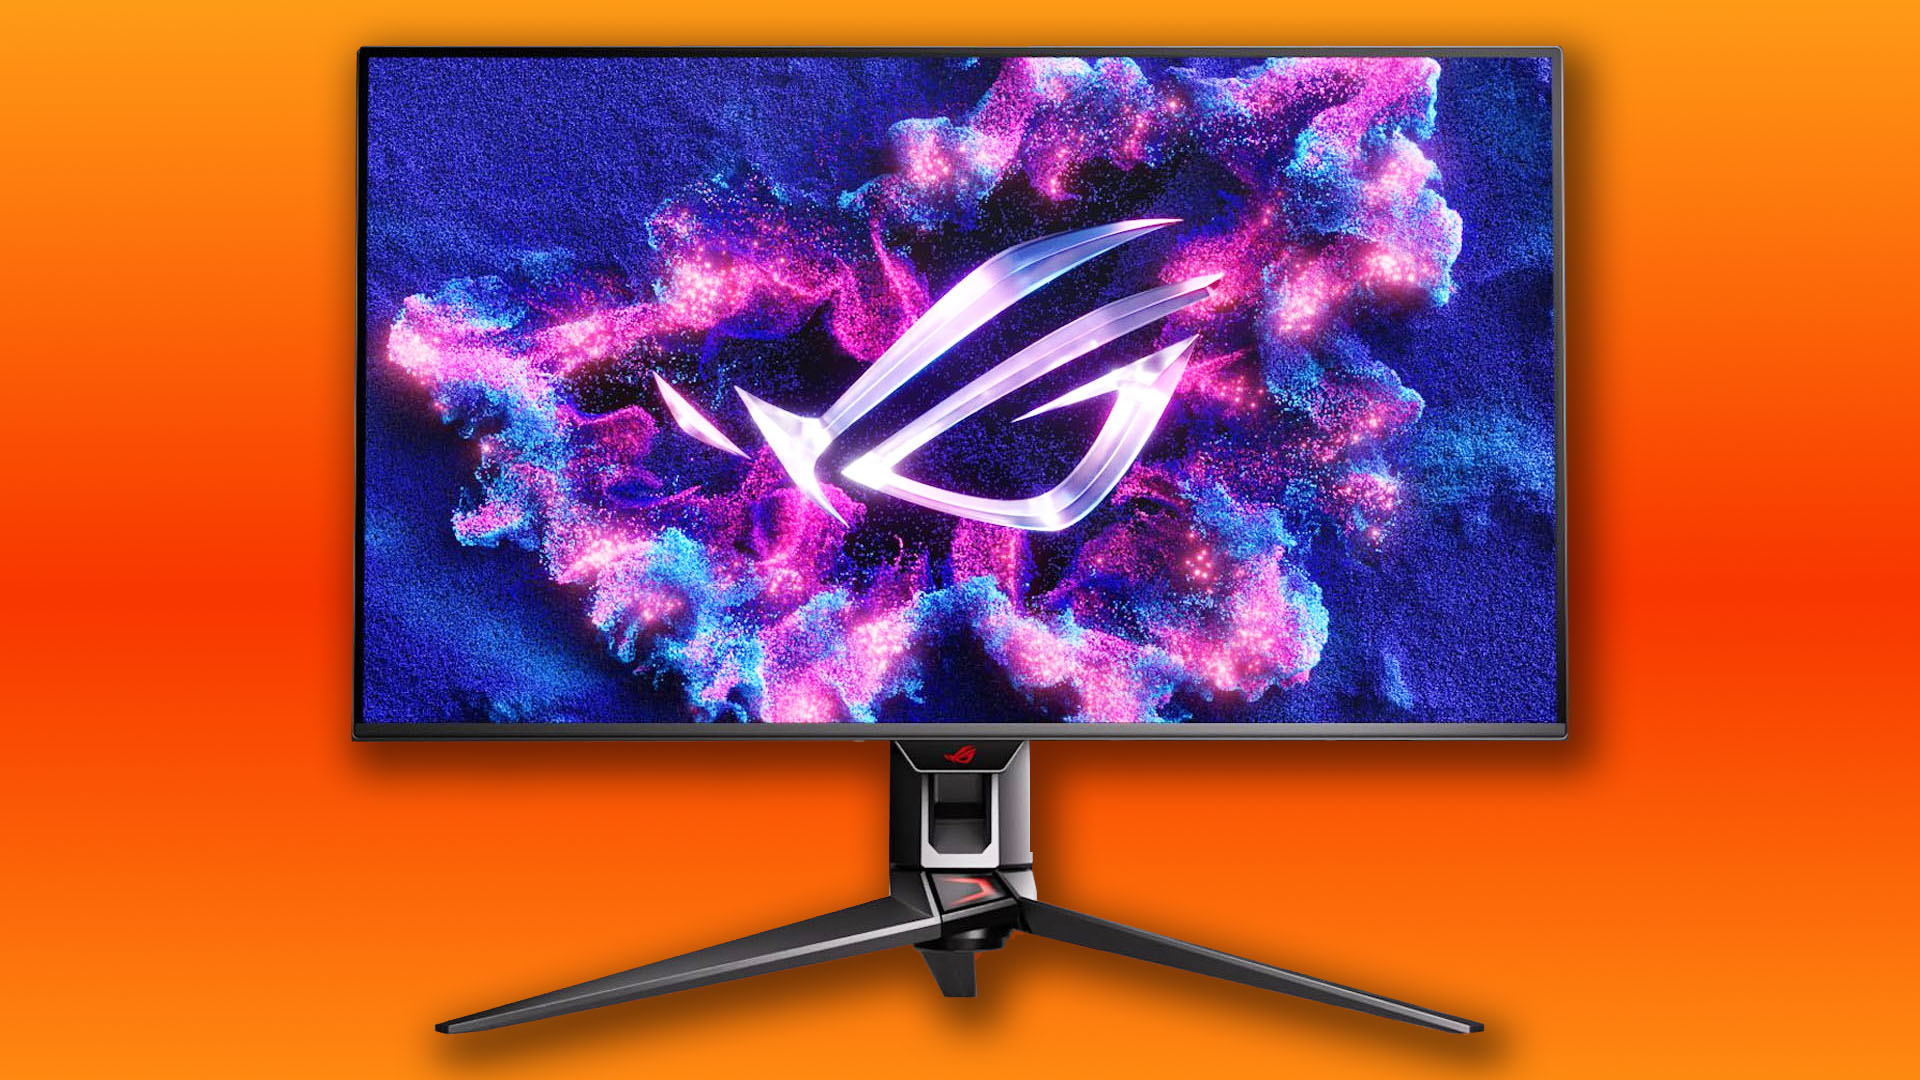 You can win an Asus OLED gaming monitor, but only if you're quick